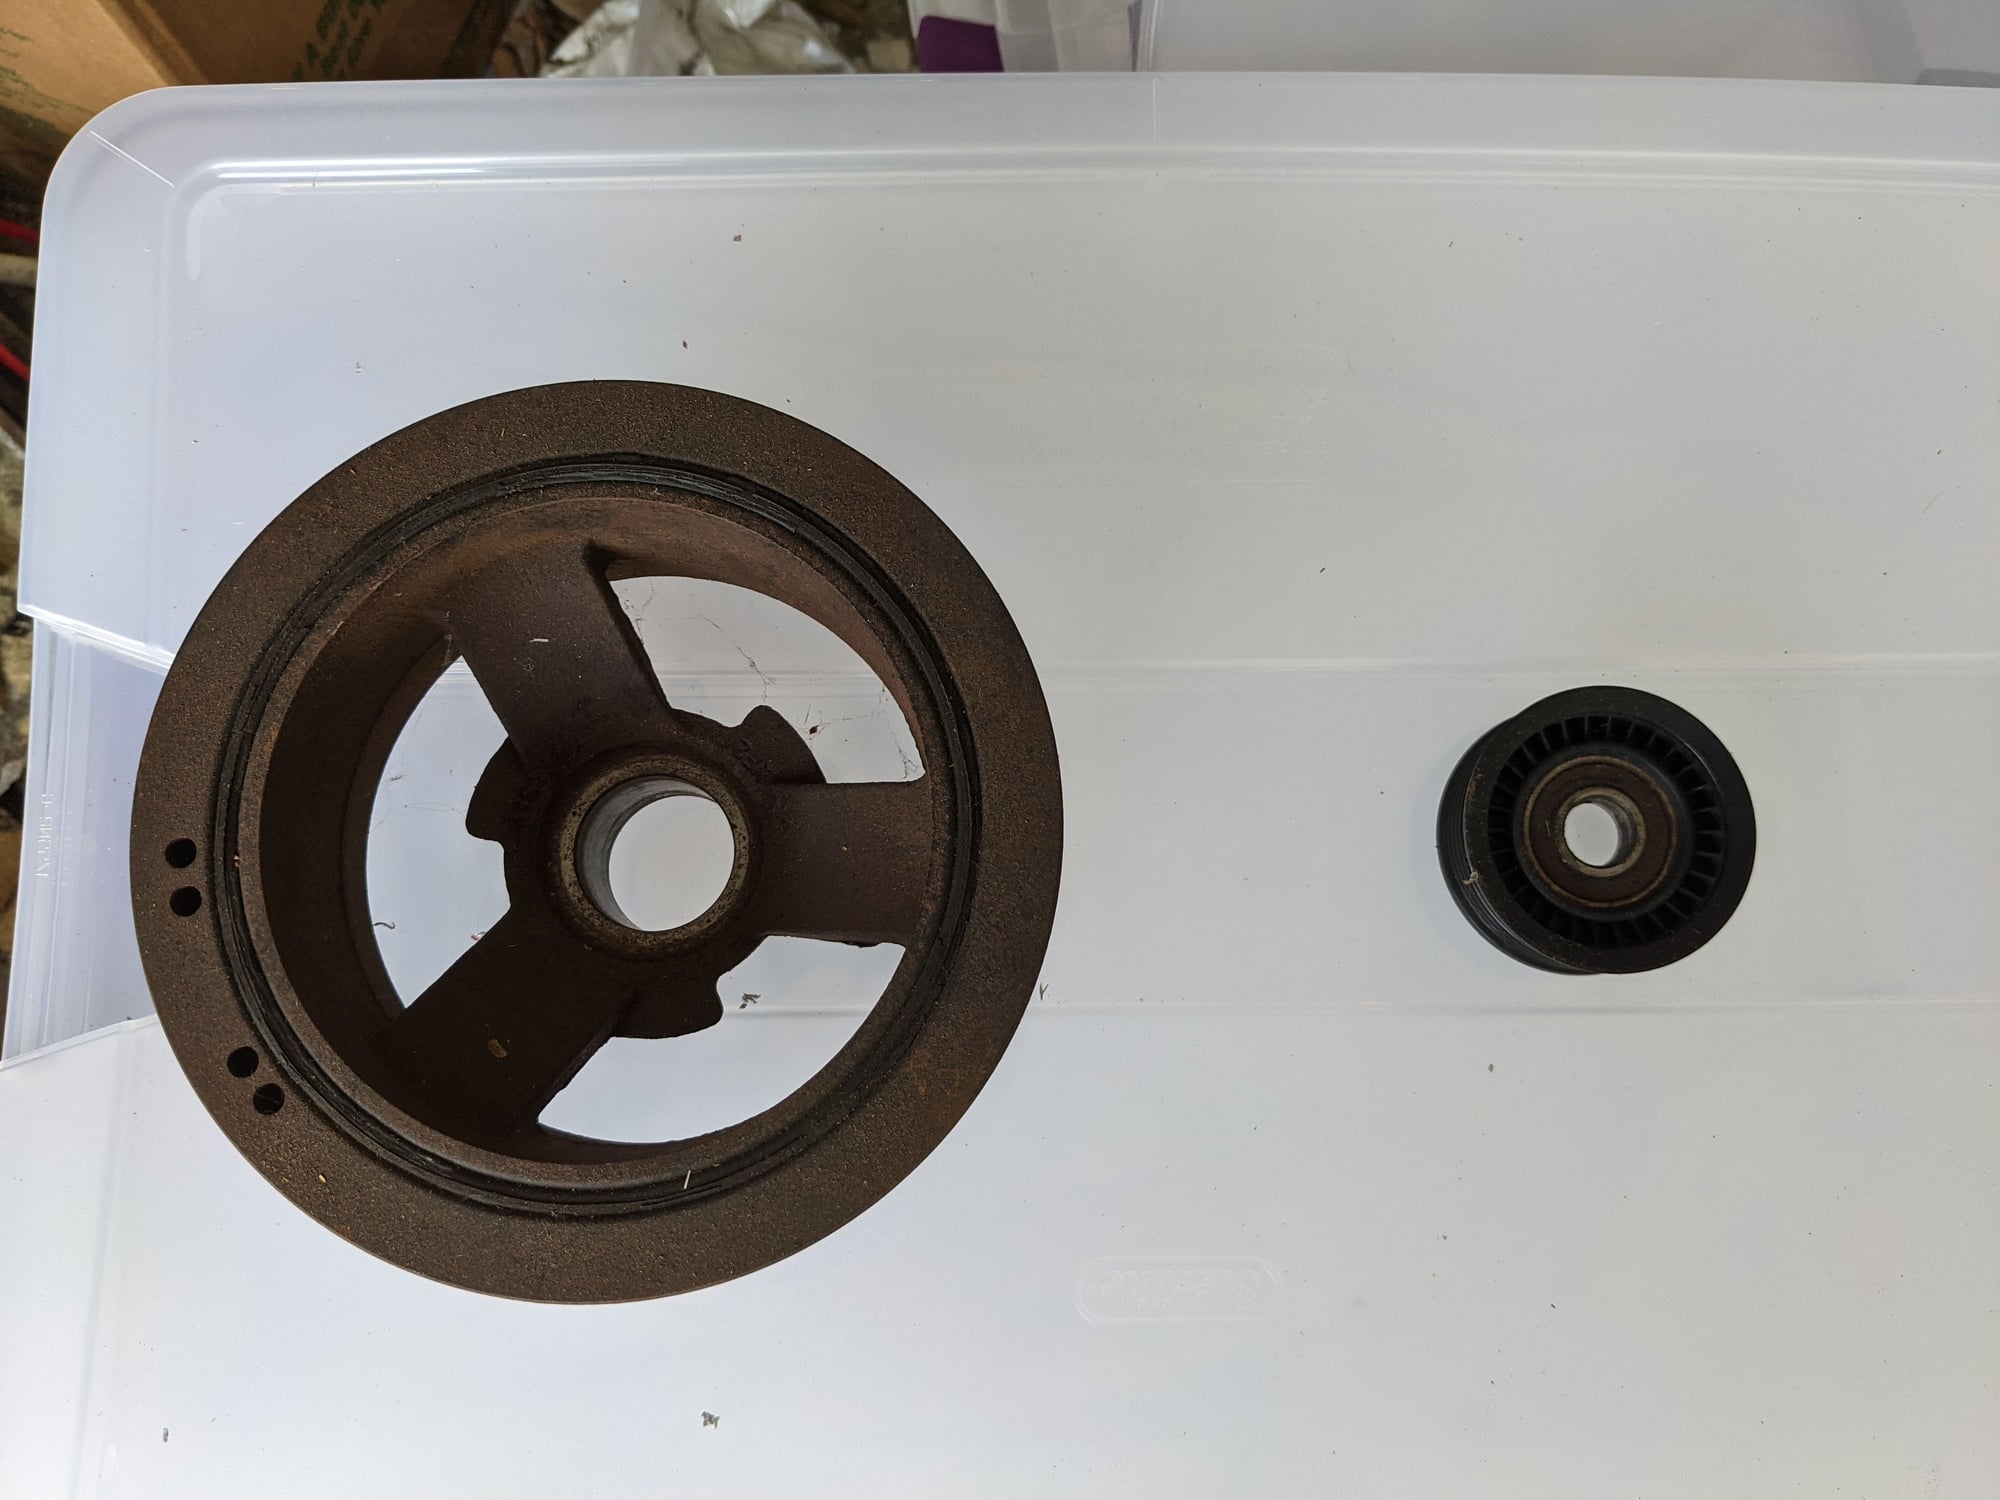 1999 Pontiac Firebird - Factory balancer/pulley and alternator pulley - Accessories - $1 - Morrisville, NC 27560, United States